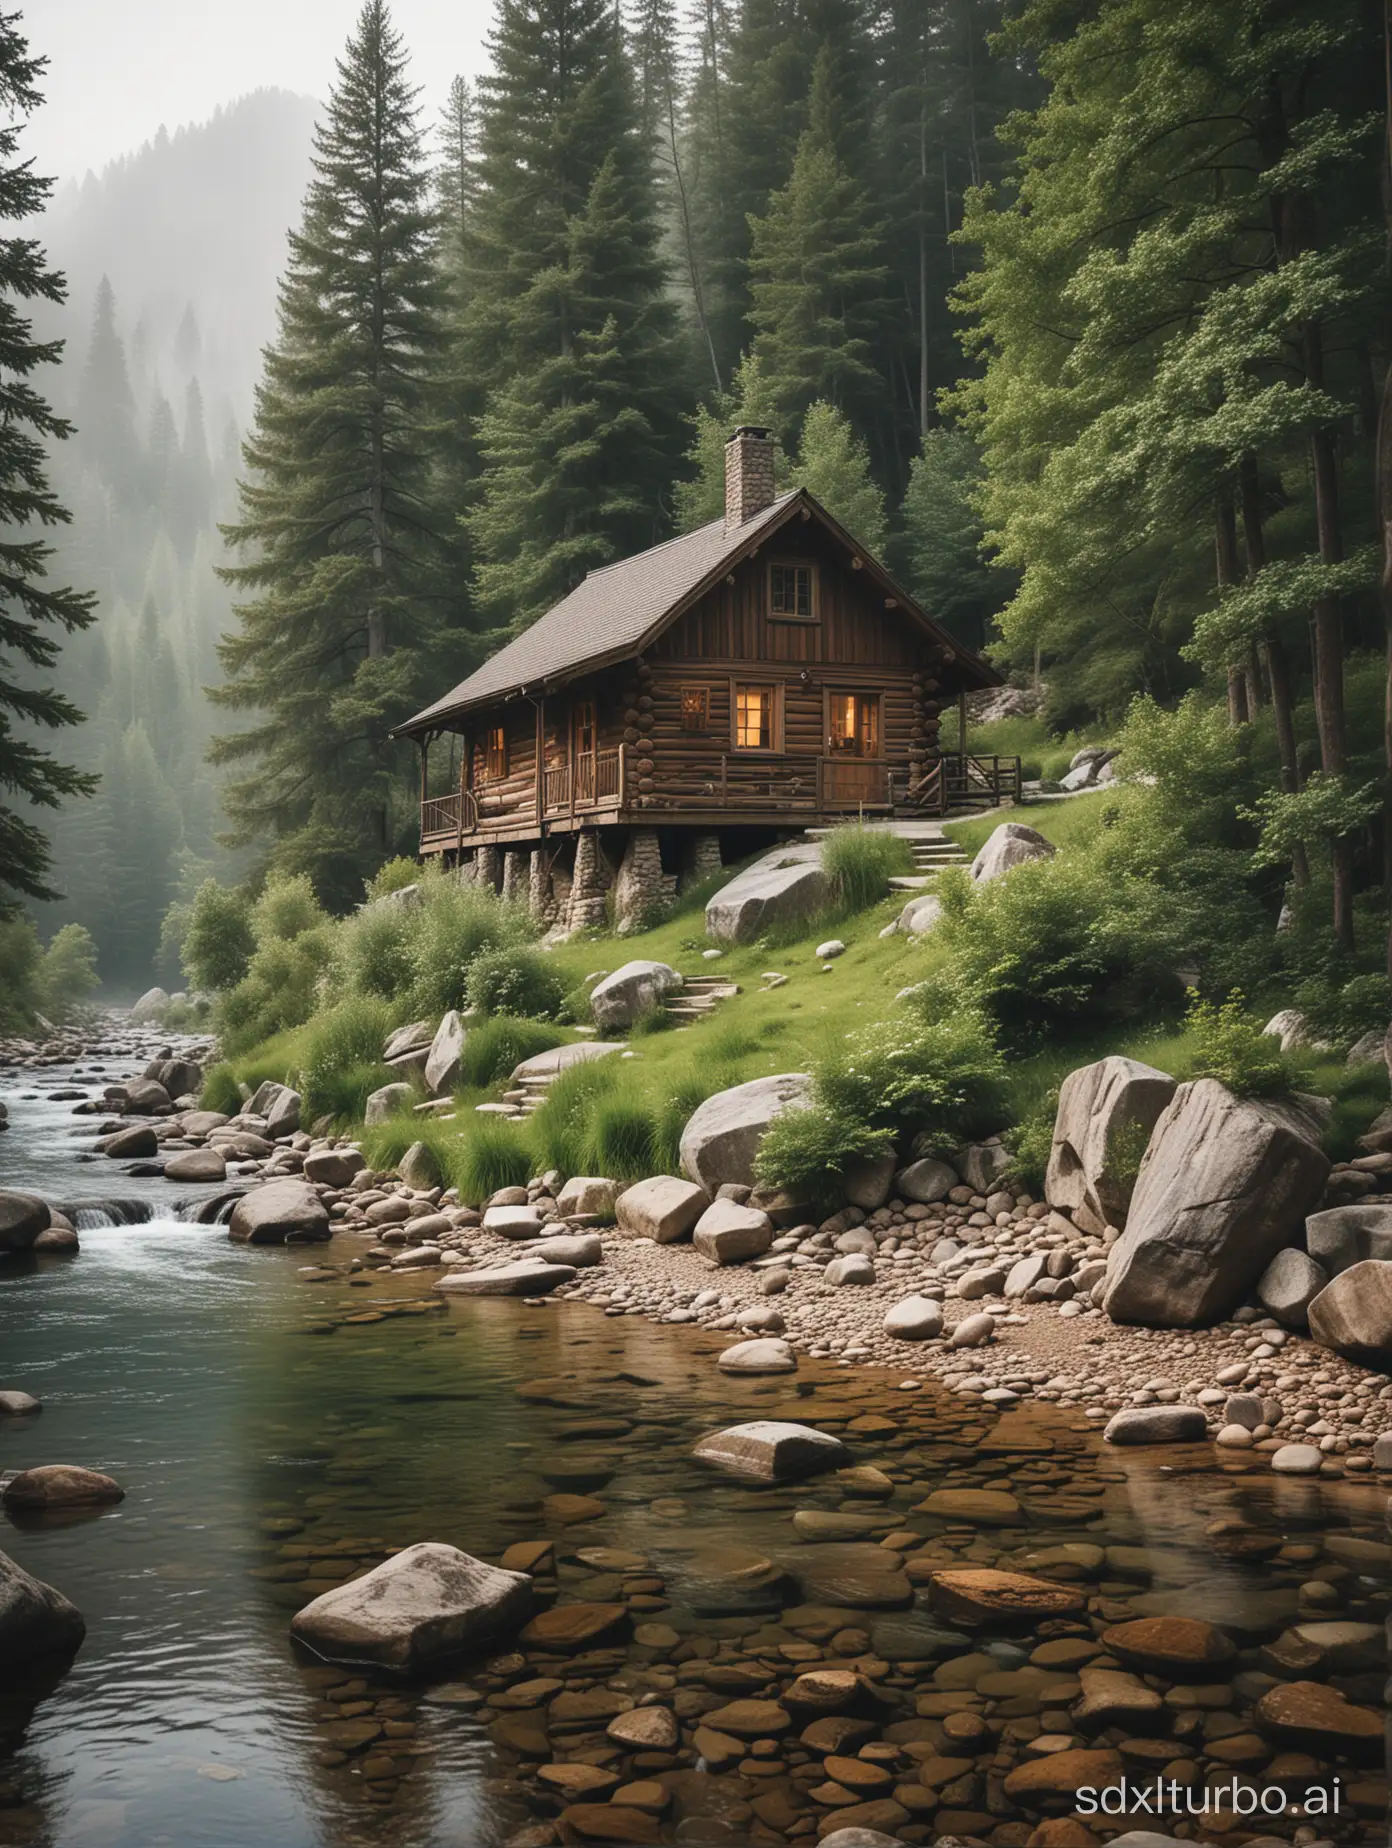 a serene and picturesque image of a rustic cabin by a river, nestled in a mountainous landscape. The greenery and the misty mountains in the background give it a very peaceful and secluded feel, like a perfect retreat from the hustle and bustle of modern life. The composition of the light, the textures of the trees, water, and the rocks are beautifully rendered, suggesting a skilled artist's hand in capturing this tranquil scene. It’s the kind of place that would be ideal for anyone seeking solitude or inspiration amidst nature.